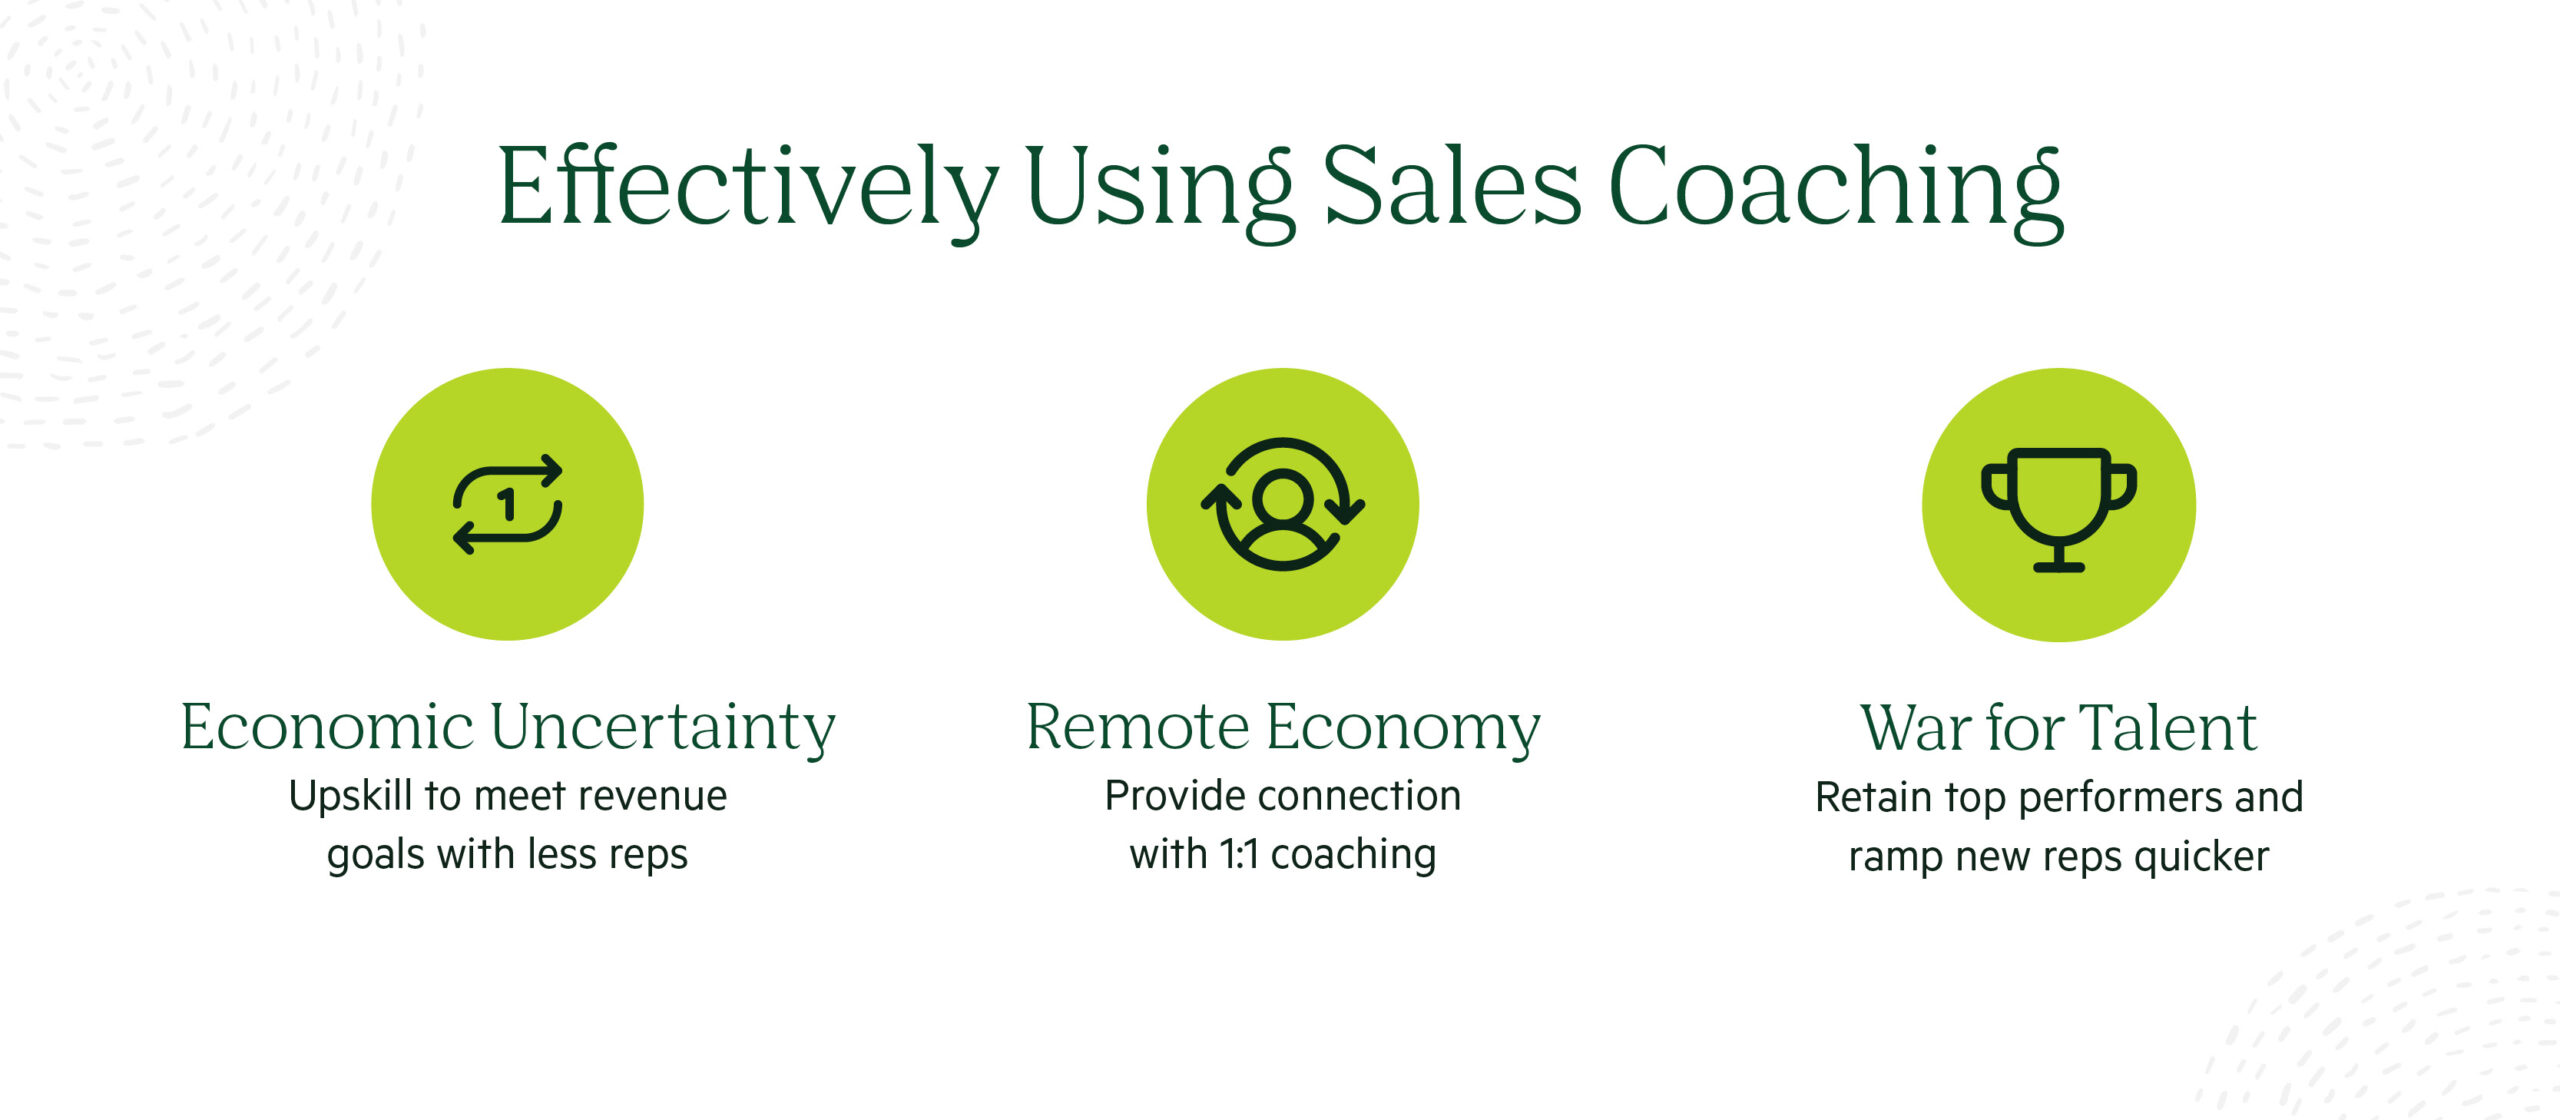 sales coaching challenges and opportunities